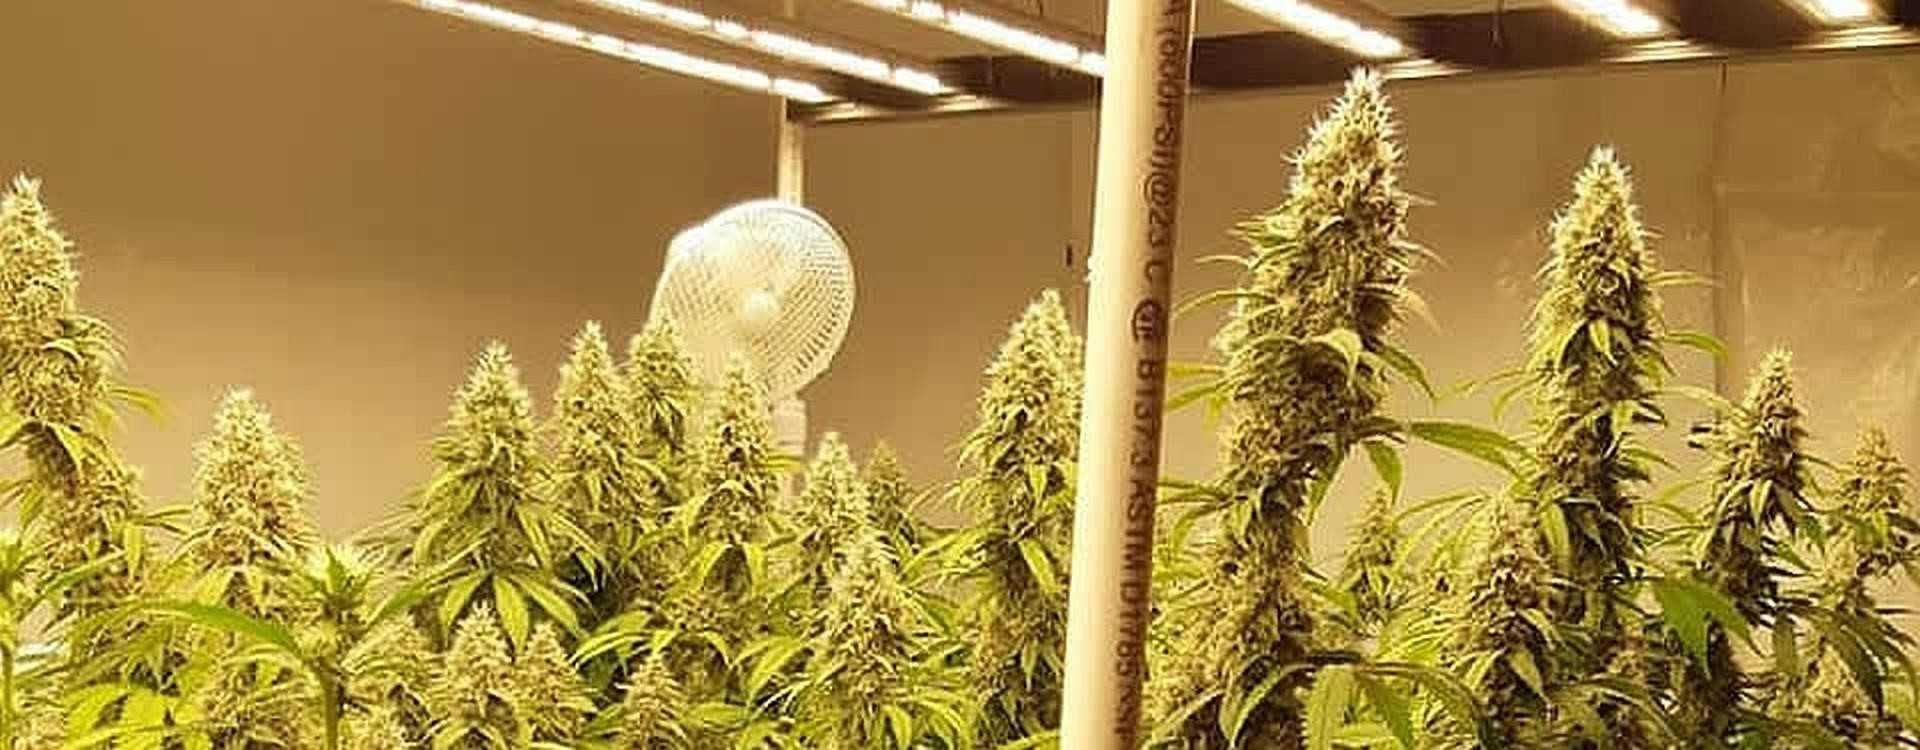 beginners guide to growing cannabis indoors